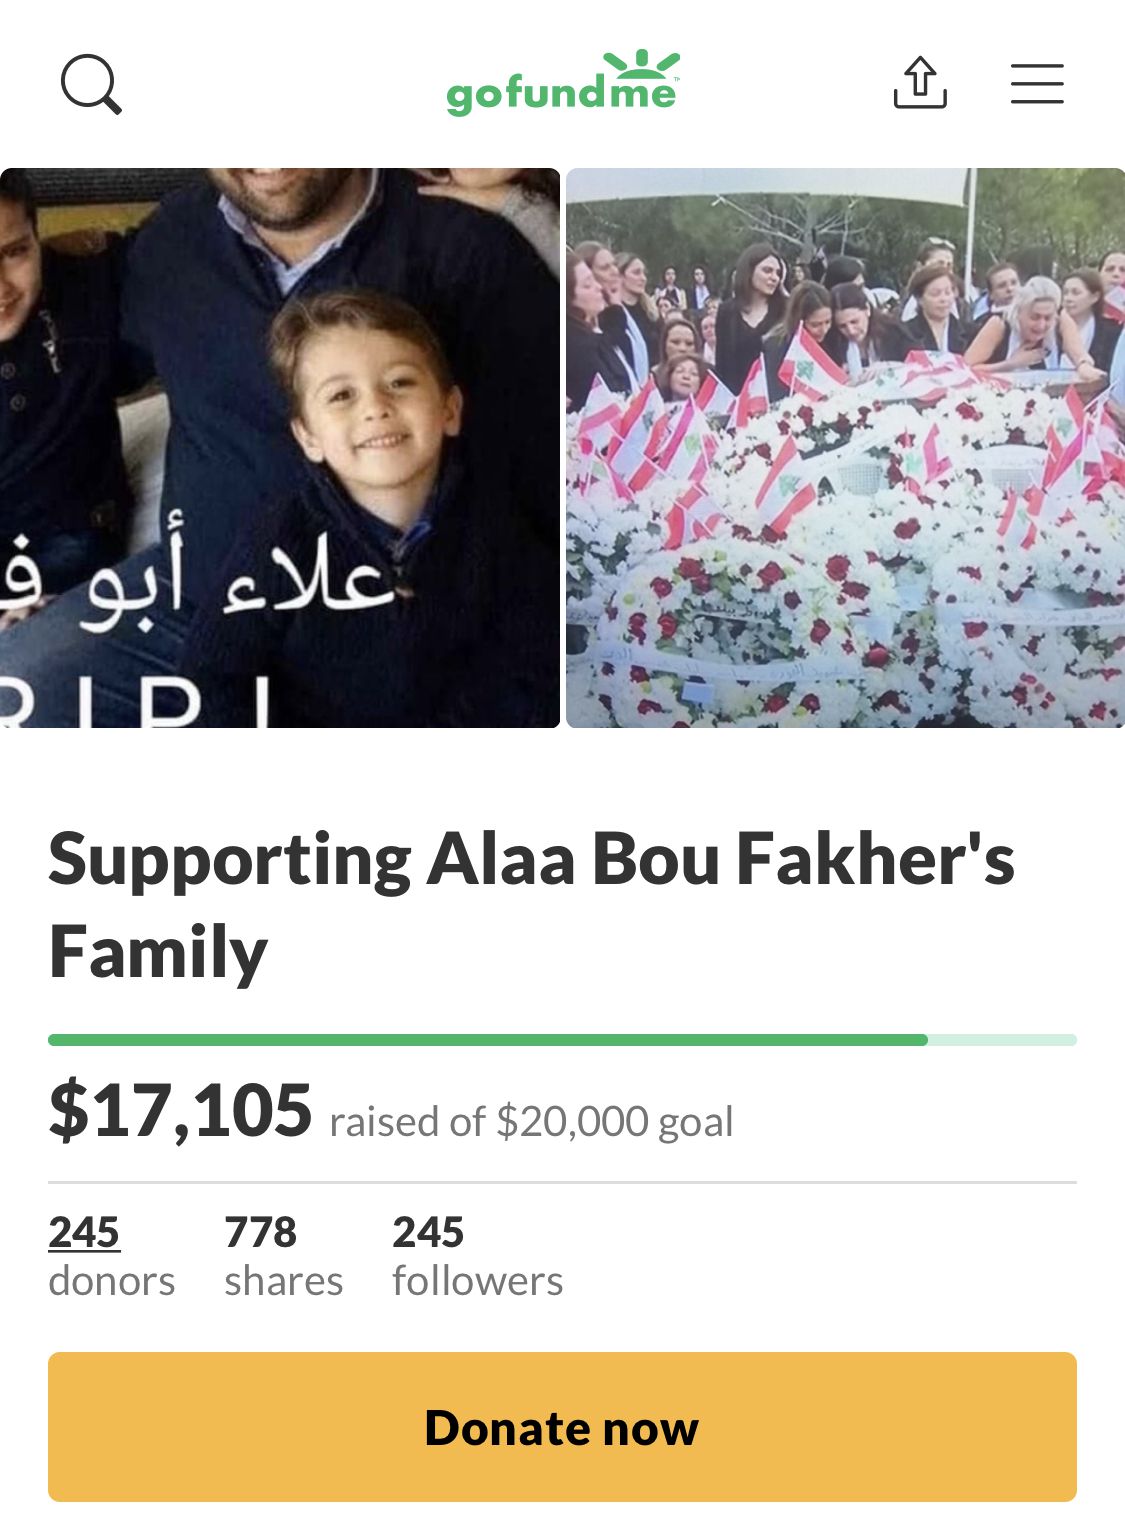 GoFundme Fundraiser In Support of Alaa Abou Fakher’s Family